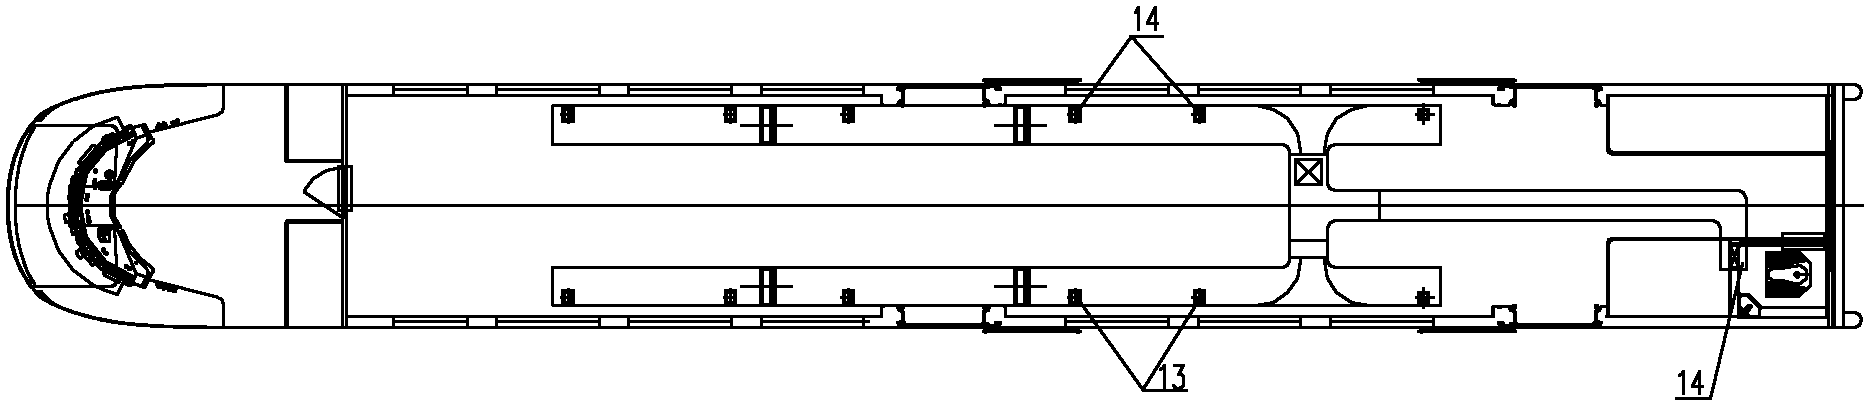 Air-conditioner air duct system used for intercity motor train unit